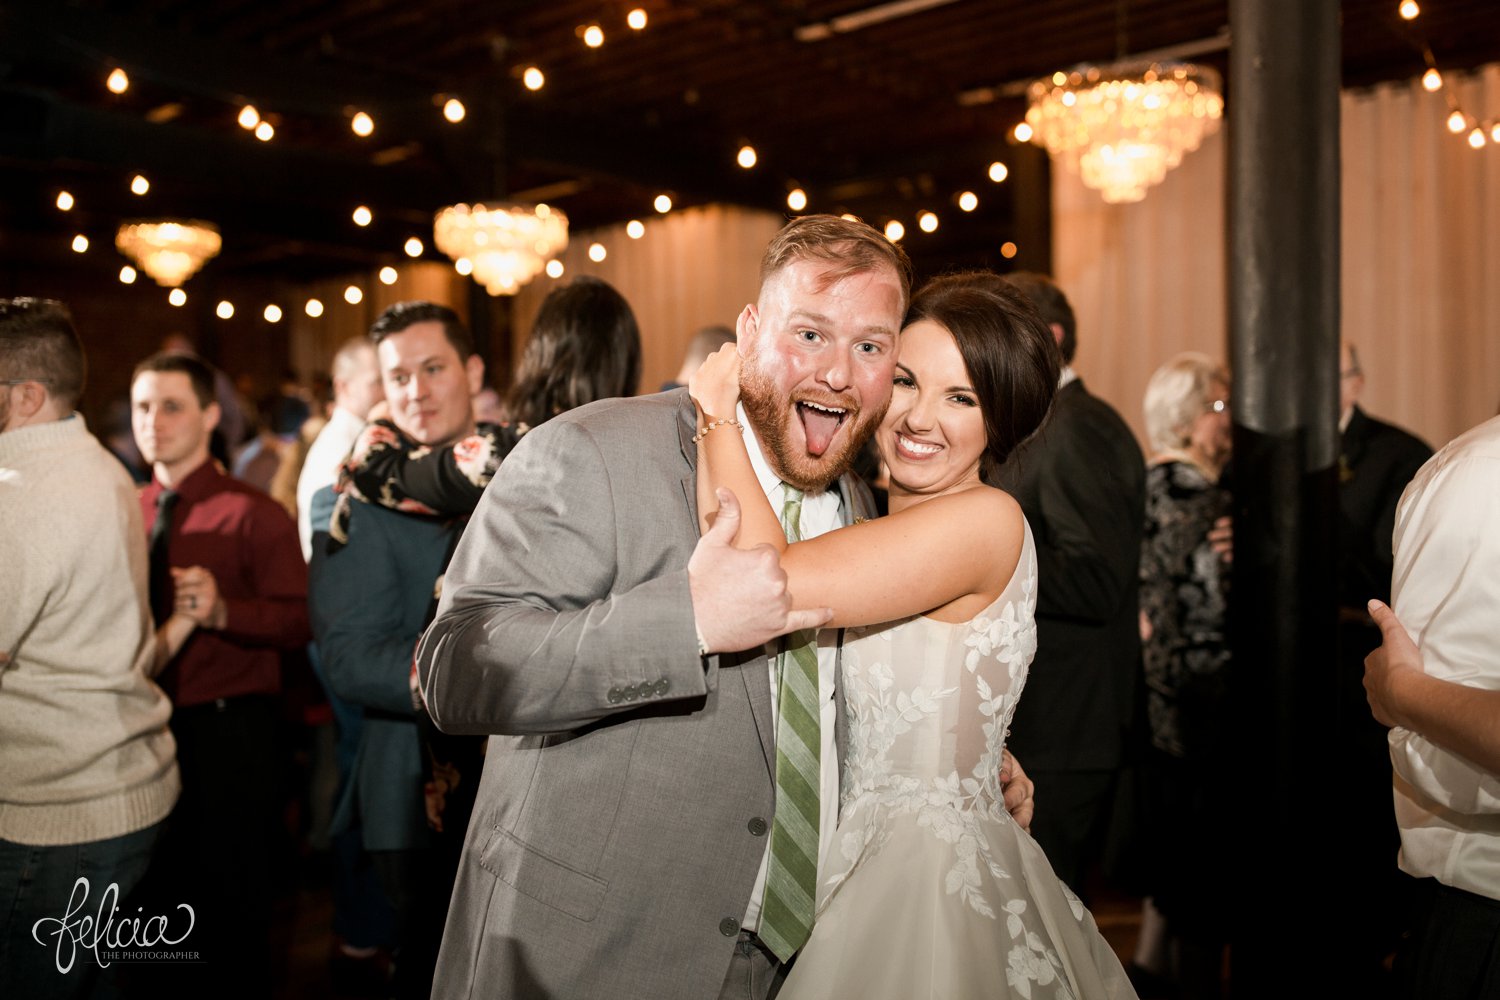 images by feliciathephotographer.com | magnolia venue | urban garden wedding | photographer | kansas city missouri | something white bridal boutique | the groomsman suit | grey and green | silly | tongue out | chandelier | hanging lights | dance floor | 